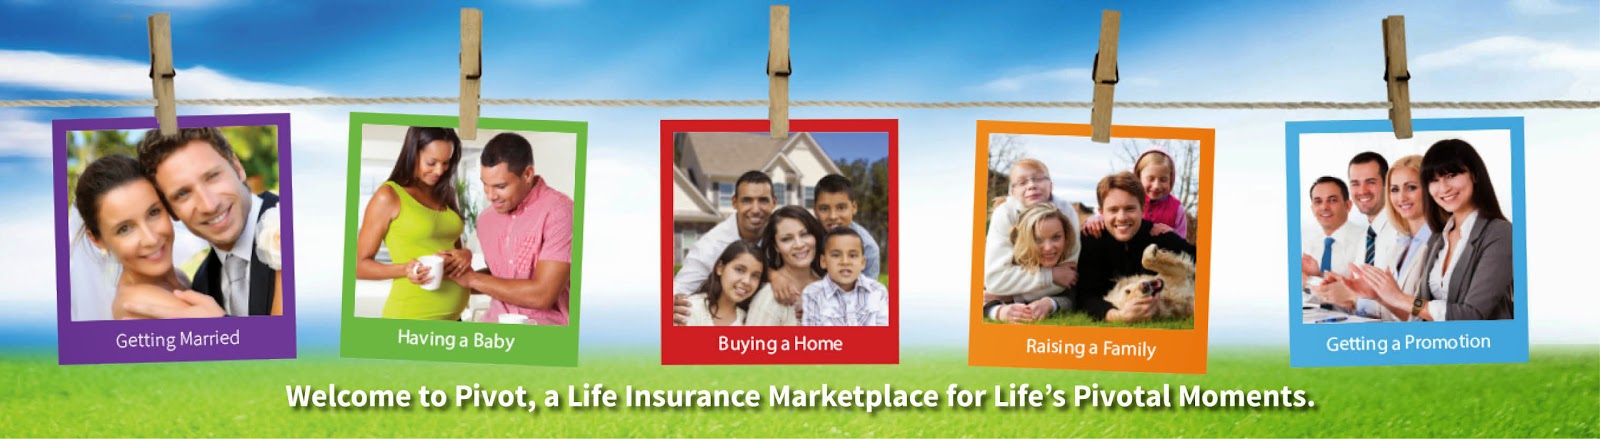 Life Insurance Marketplace: The Basics to Buying a Life Insurance Policy